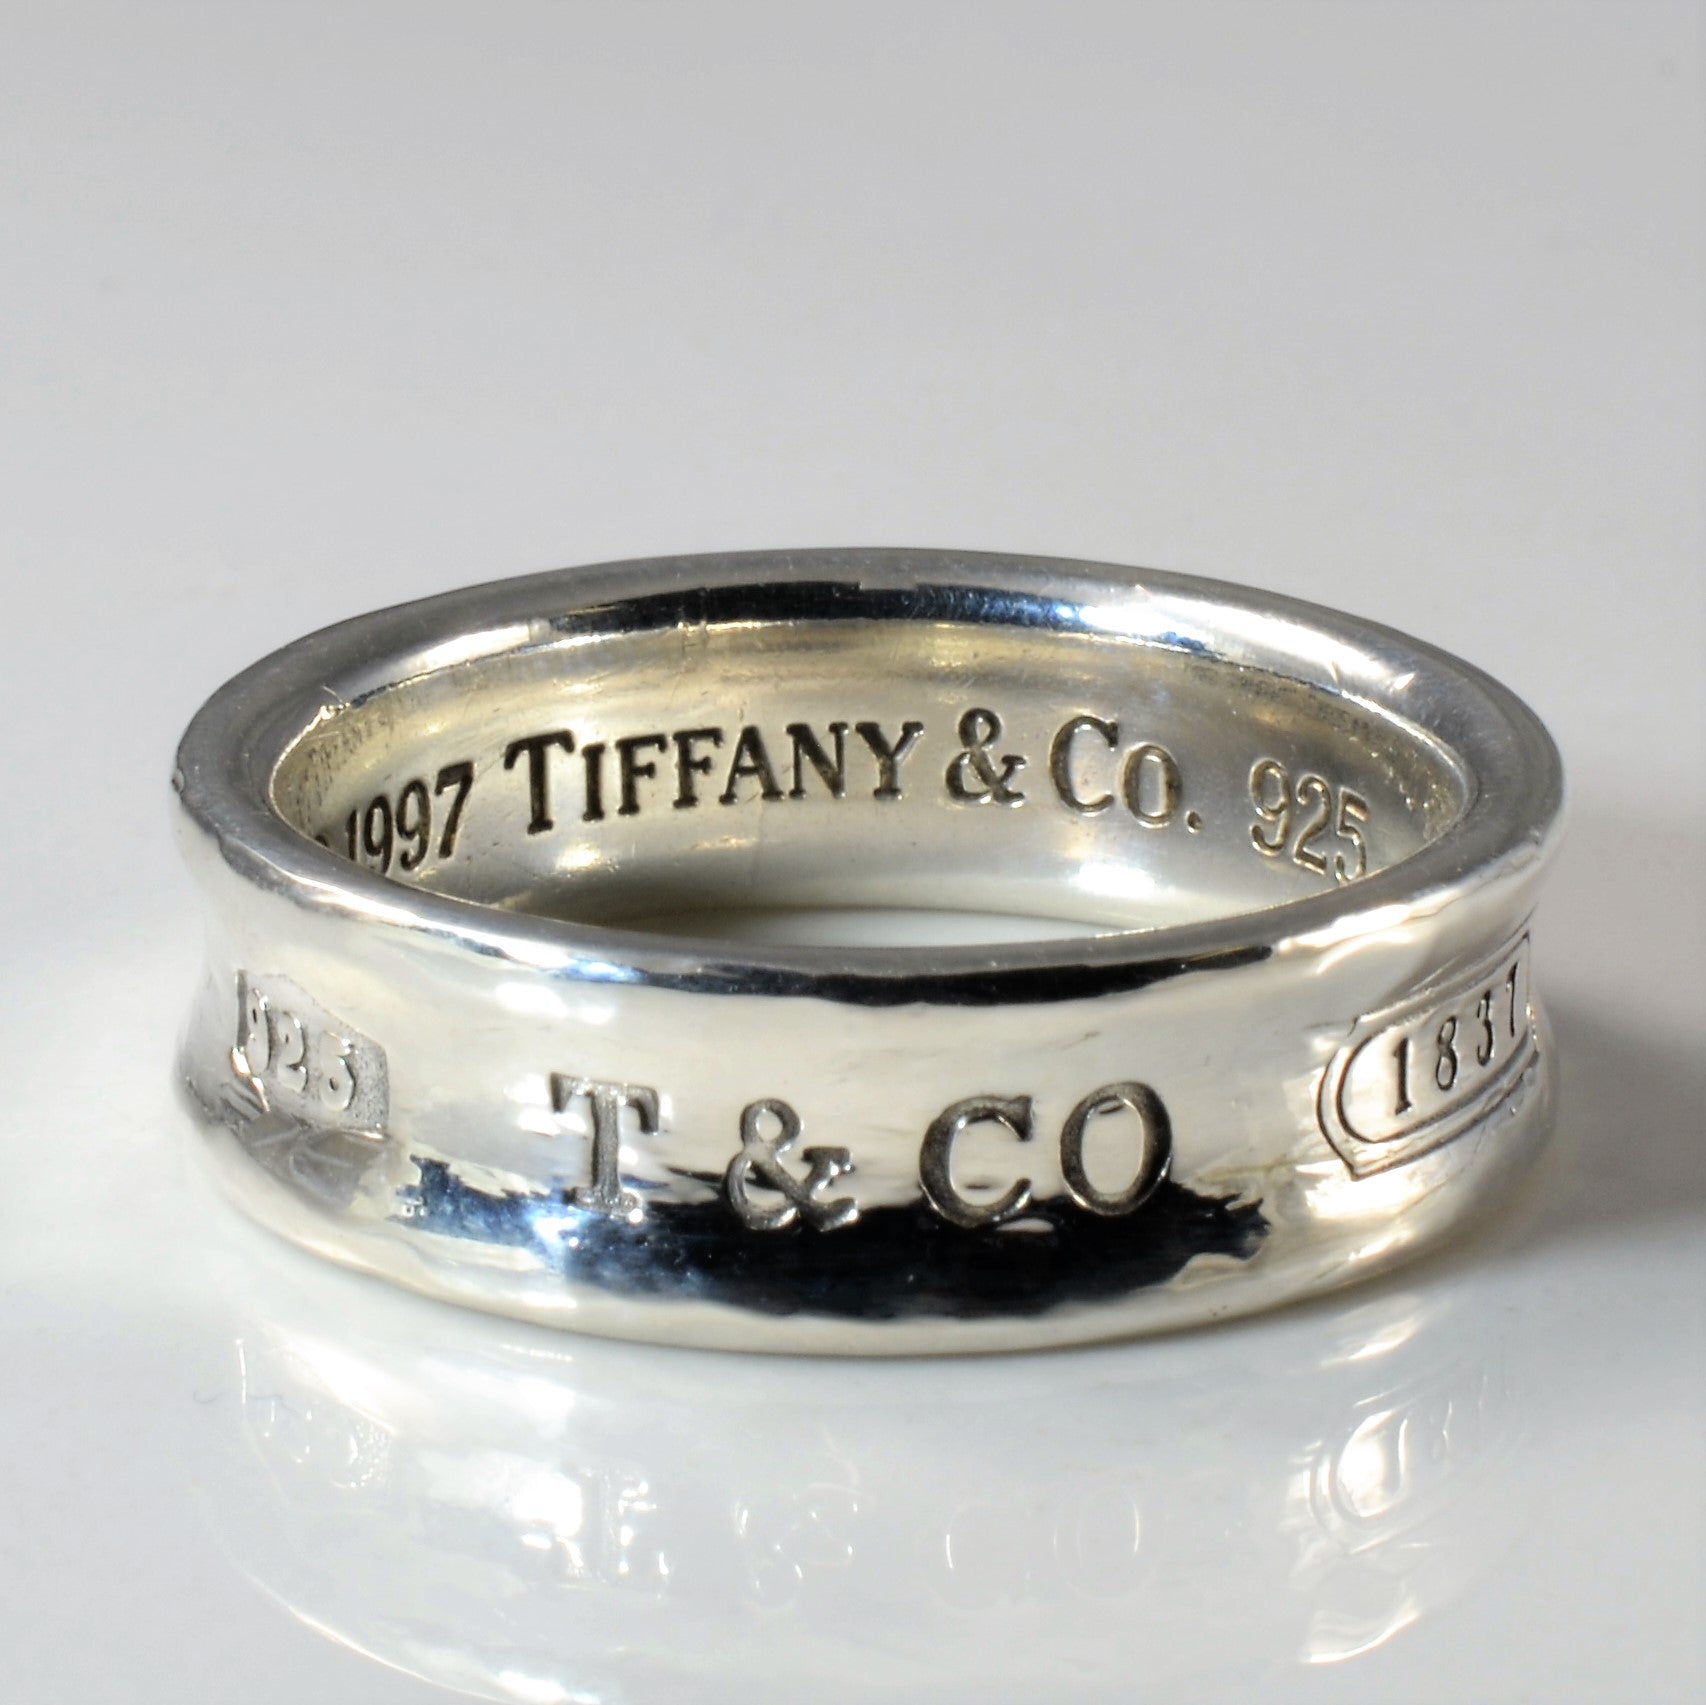 'Tiffany & Co.' 1837 Concave Ring | SZ 10.5 |